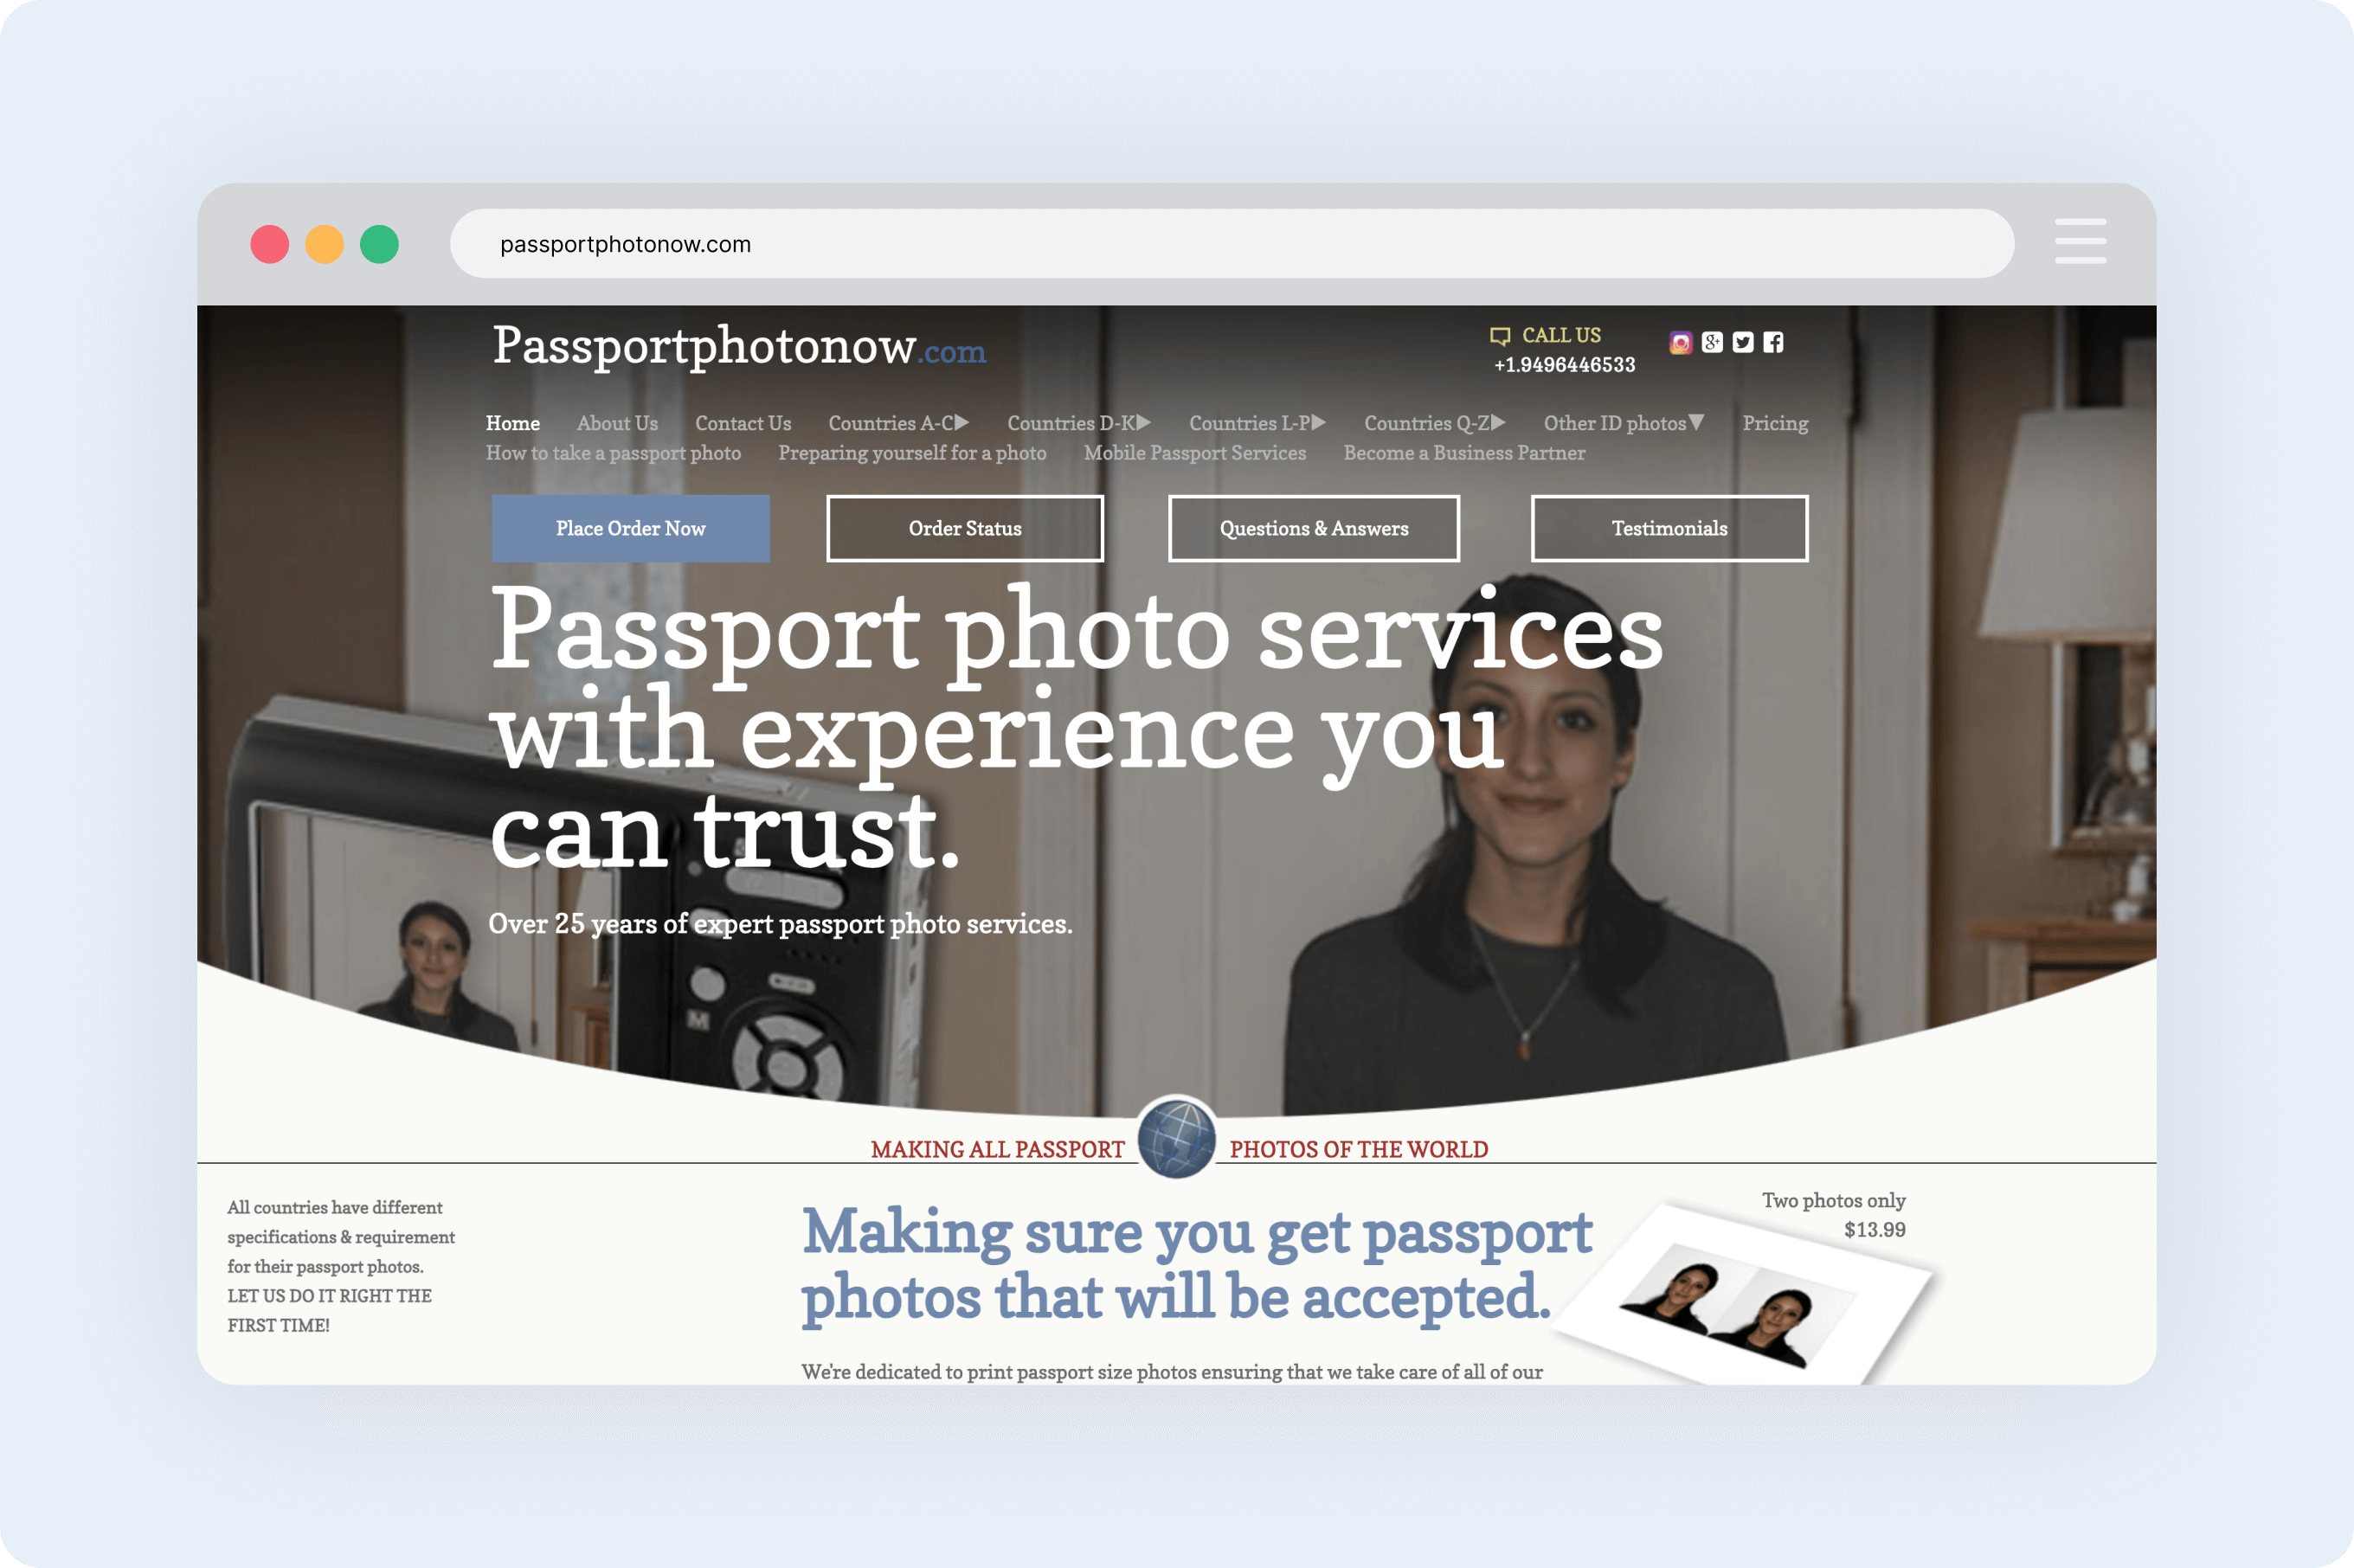 A browser open to Passportphotonow’s webpage.